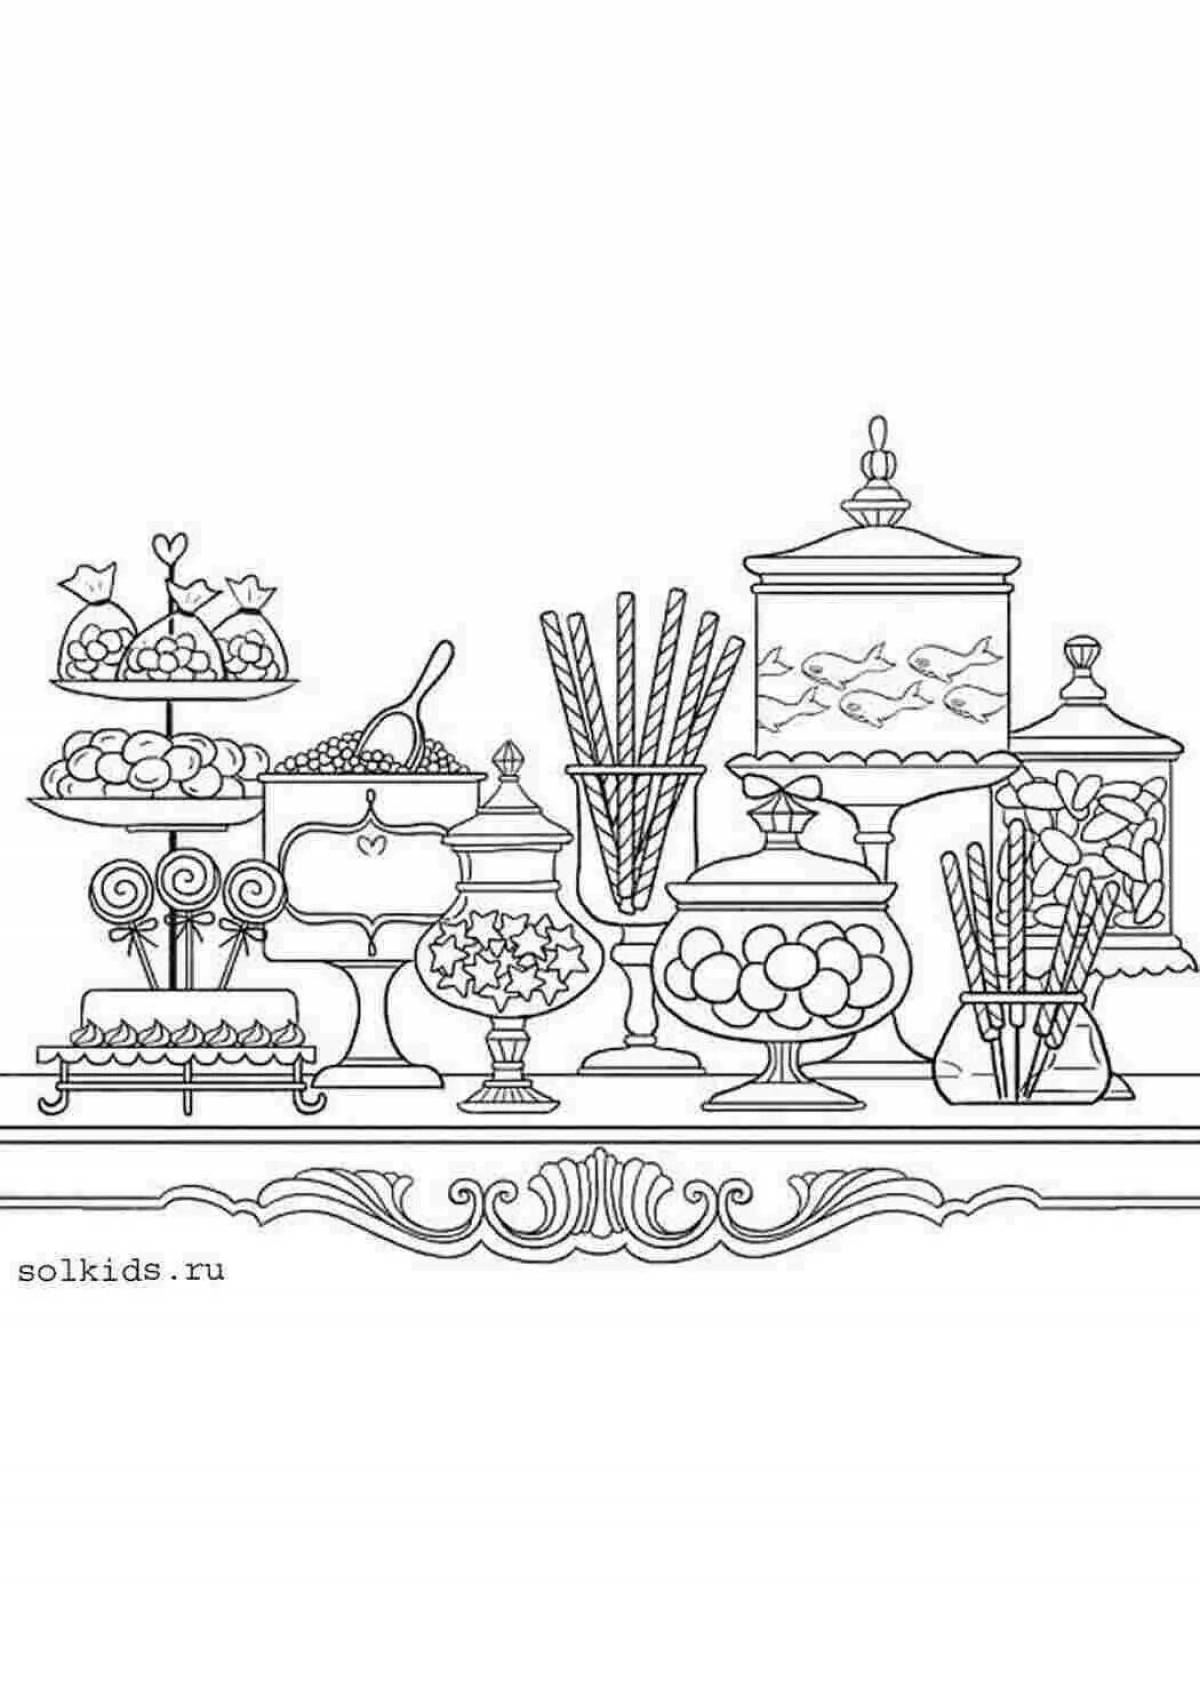 Savory Dishes and Food Coloring Page